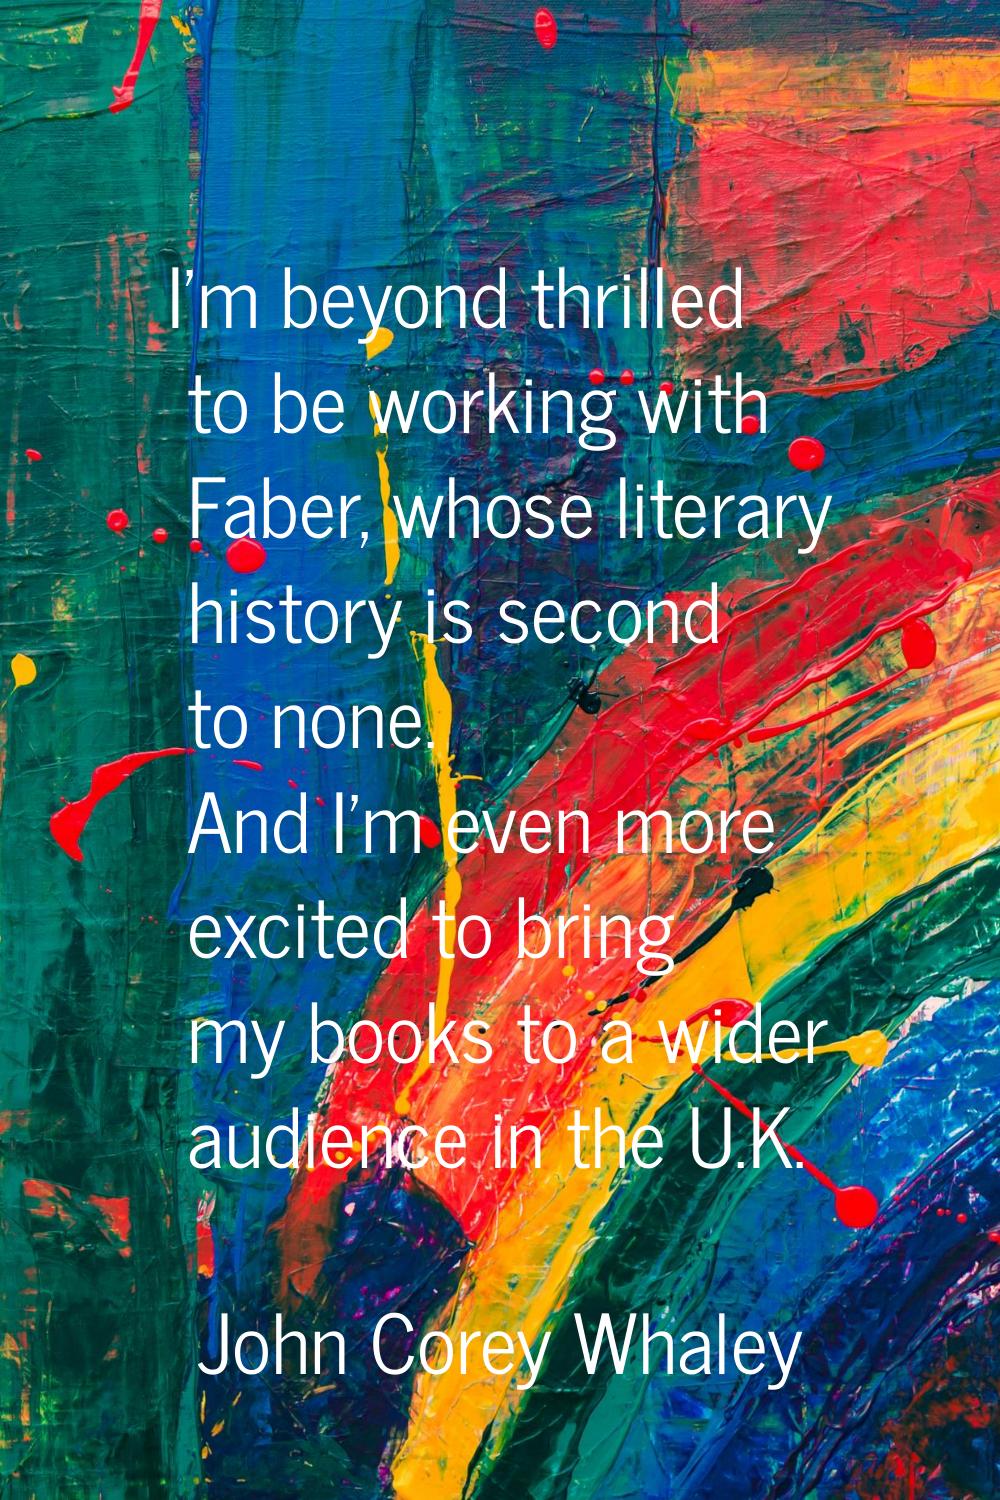 I'm beyond thrilled to be working with Faber, whose literary history is second to none. And I'm eve